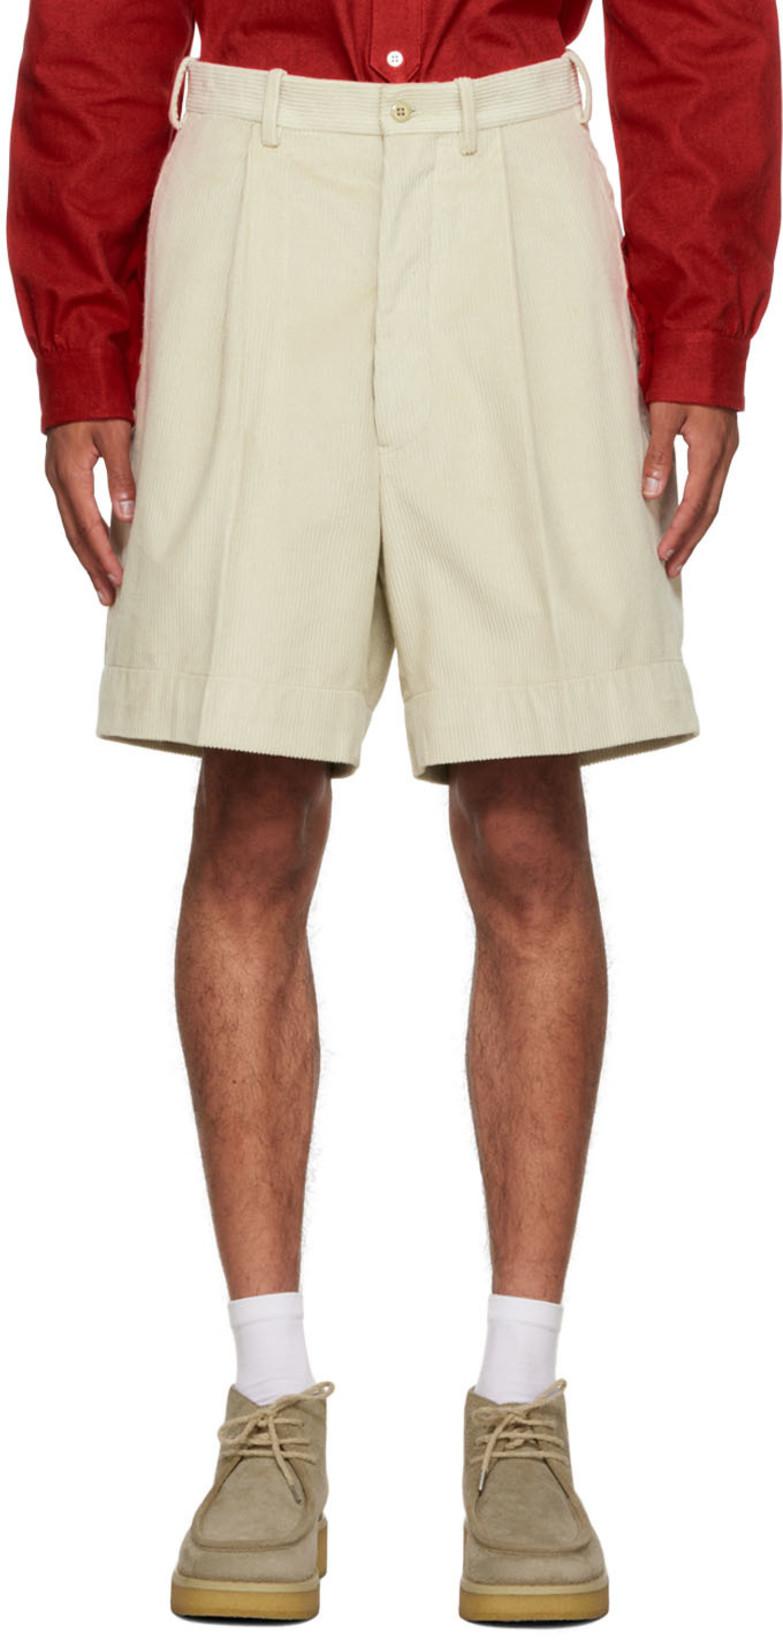 Beige Cotton Shorts by CONNOR MC KNIGHT